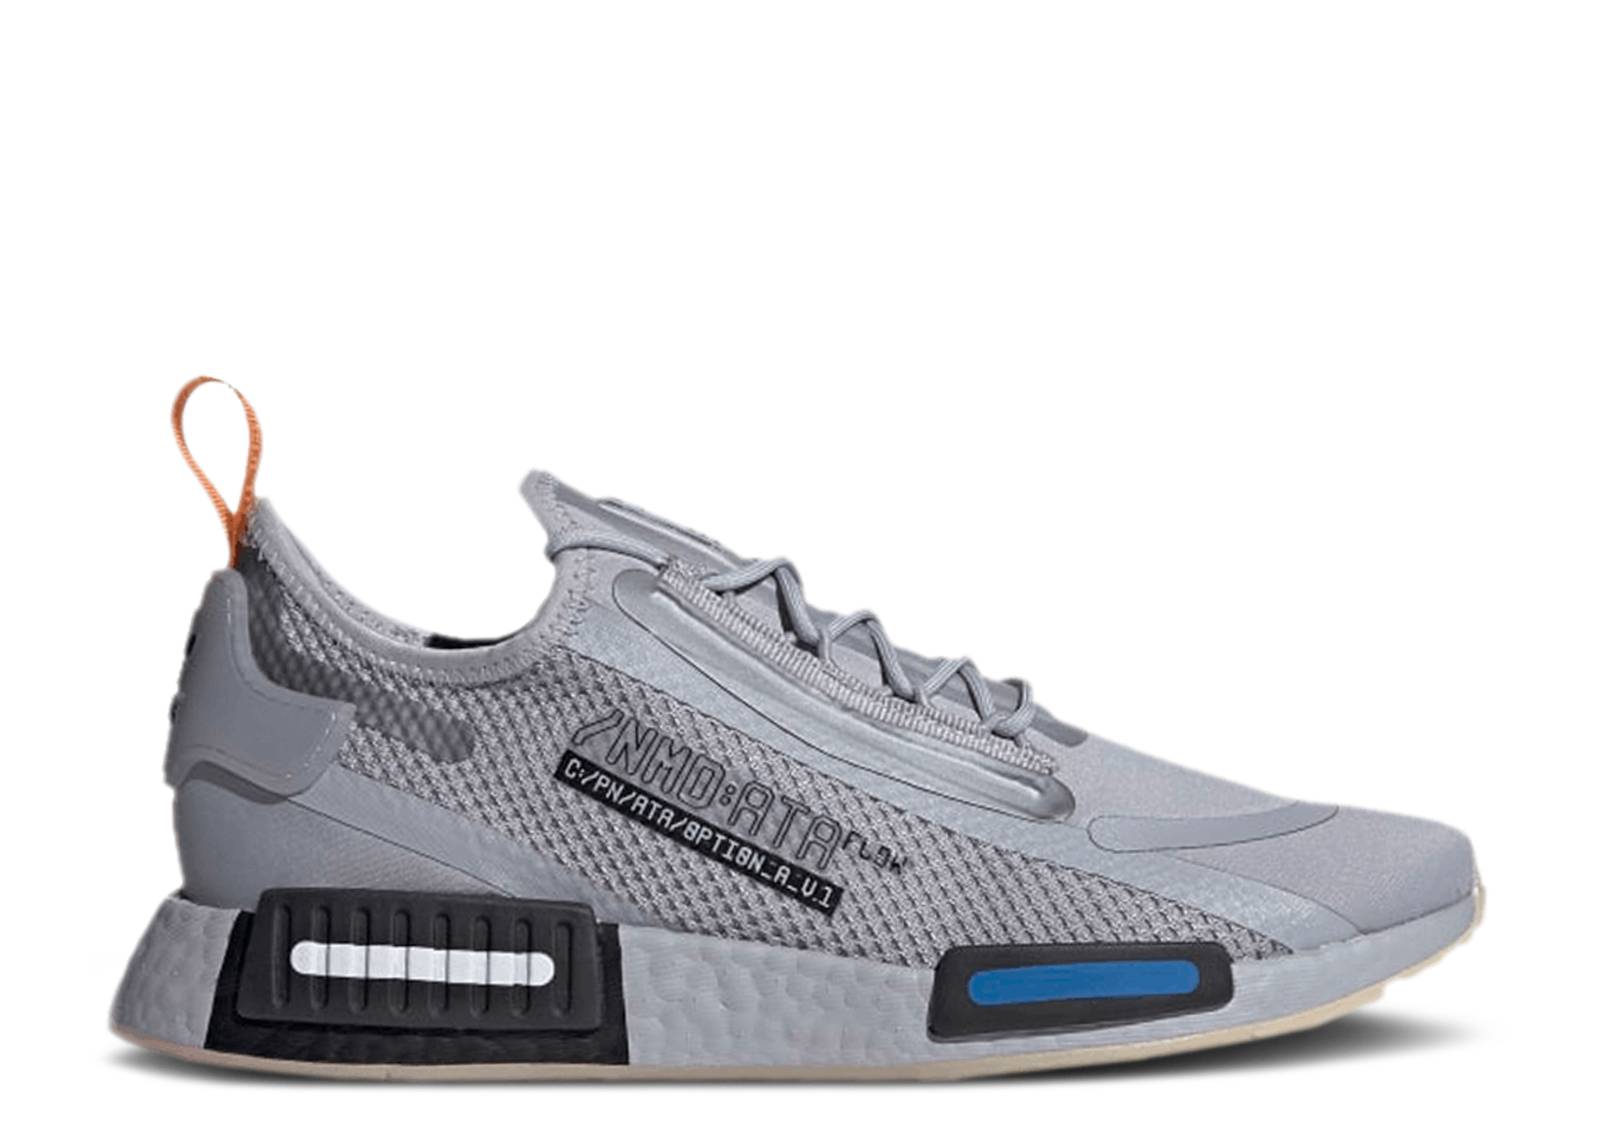 NMD_R1 Spectoo 'Halo Silver'